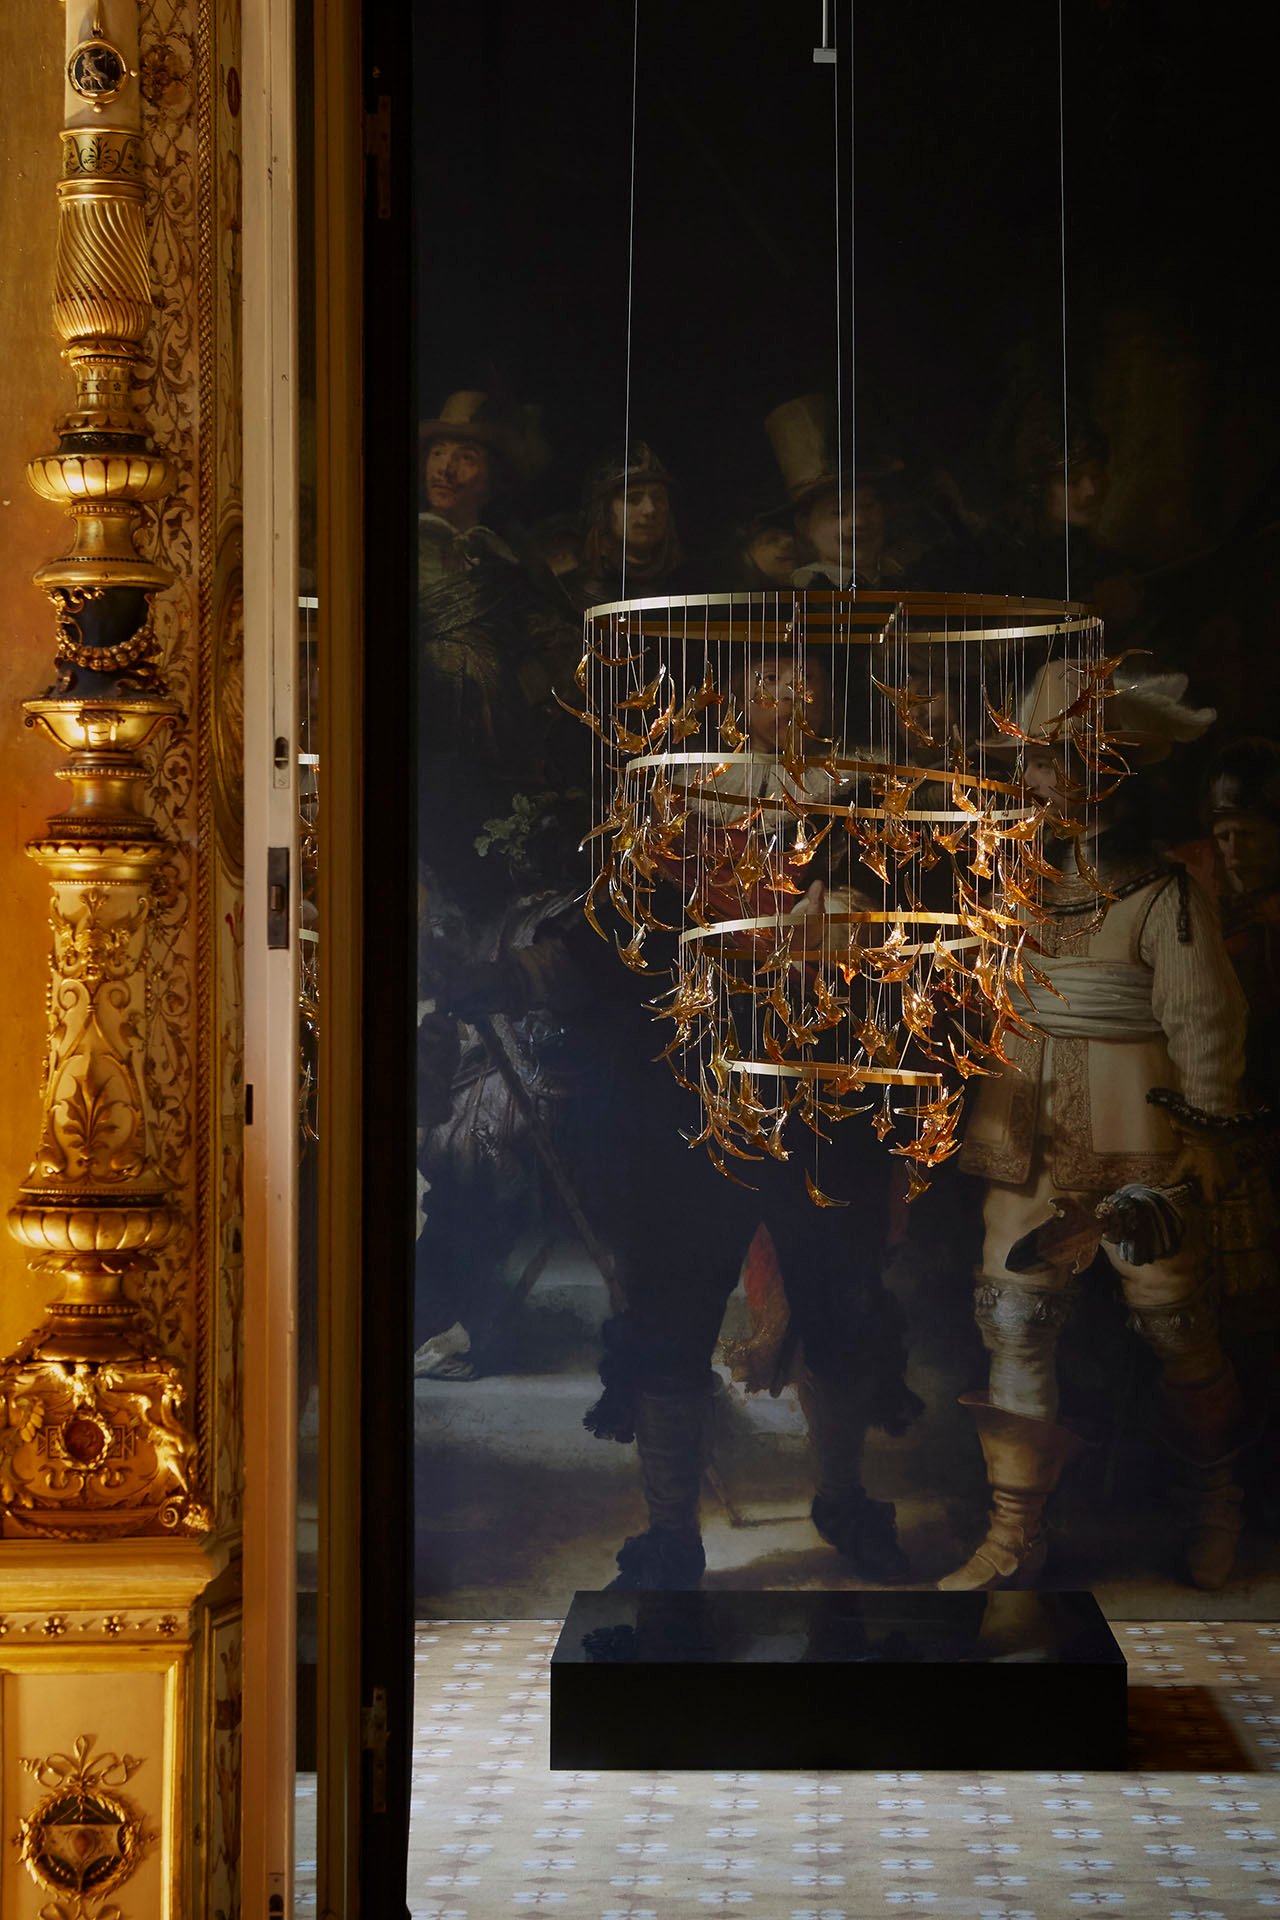 Glass birds chandelier by Dutch glass artist Bibi Smit inspired by the colours of the "NightWatch" by Rembrandt. Installation view at Palazzo Francesco Turati as part of the "Masterly- the Dutch in Milano" exhibition. Photo by Laura Majolino.